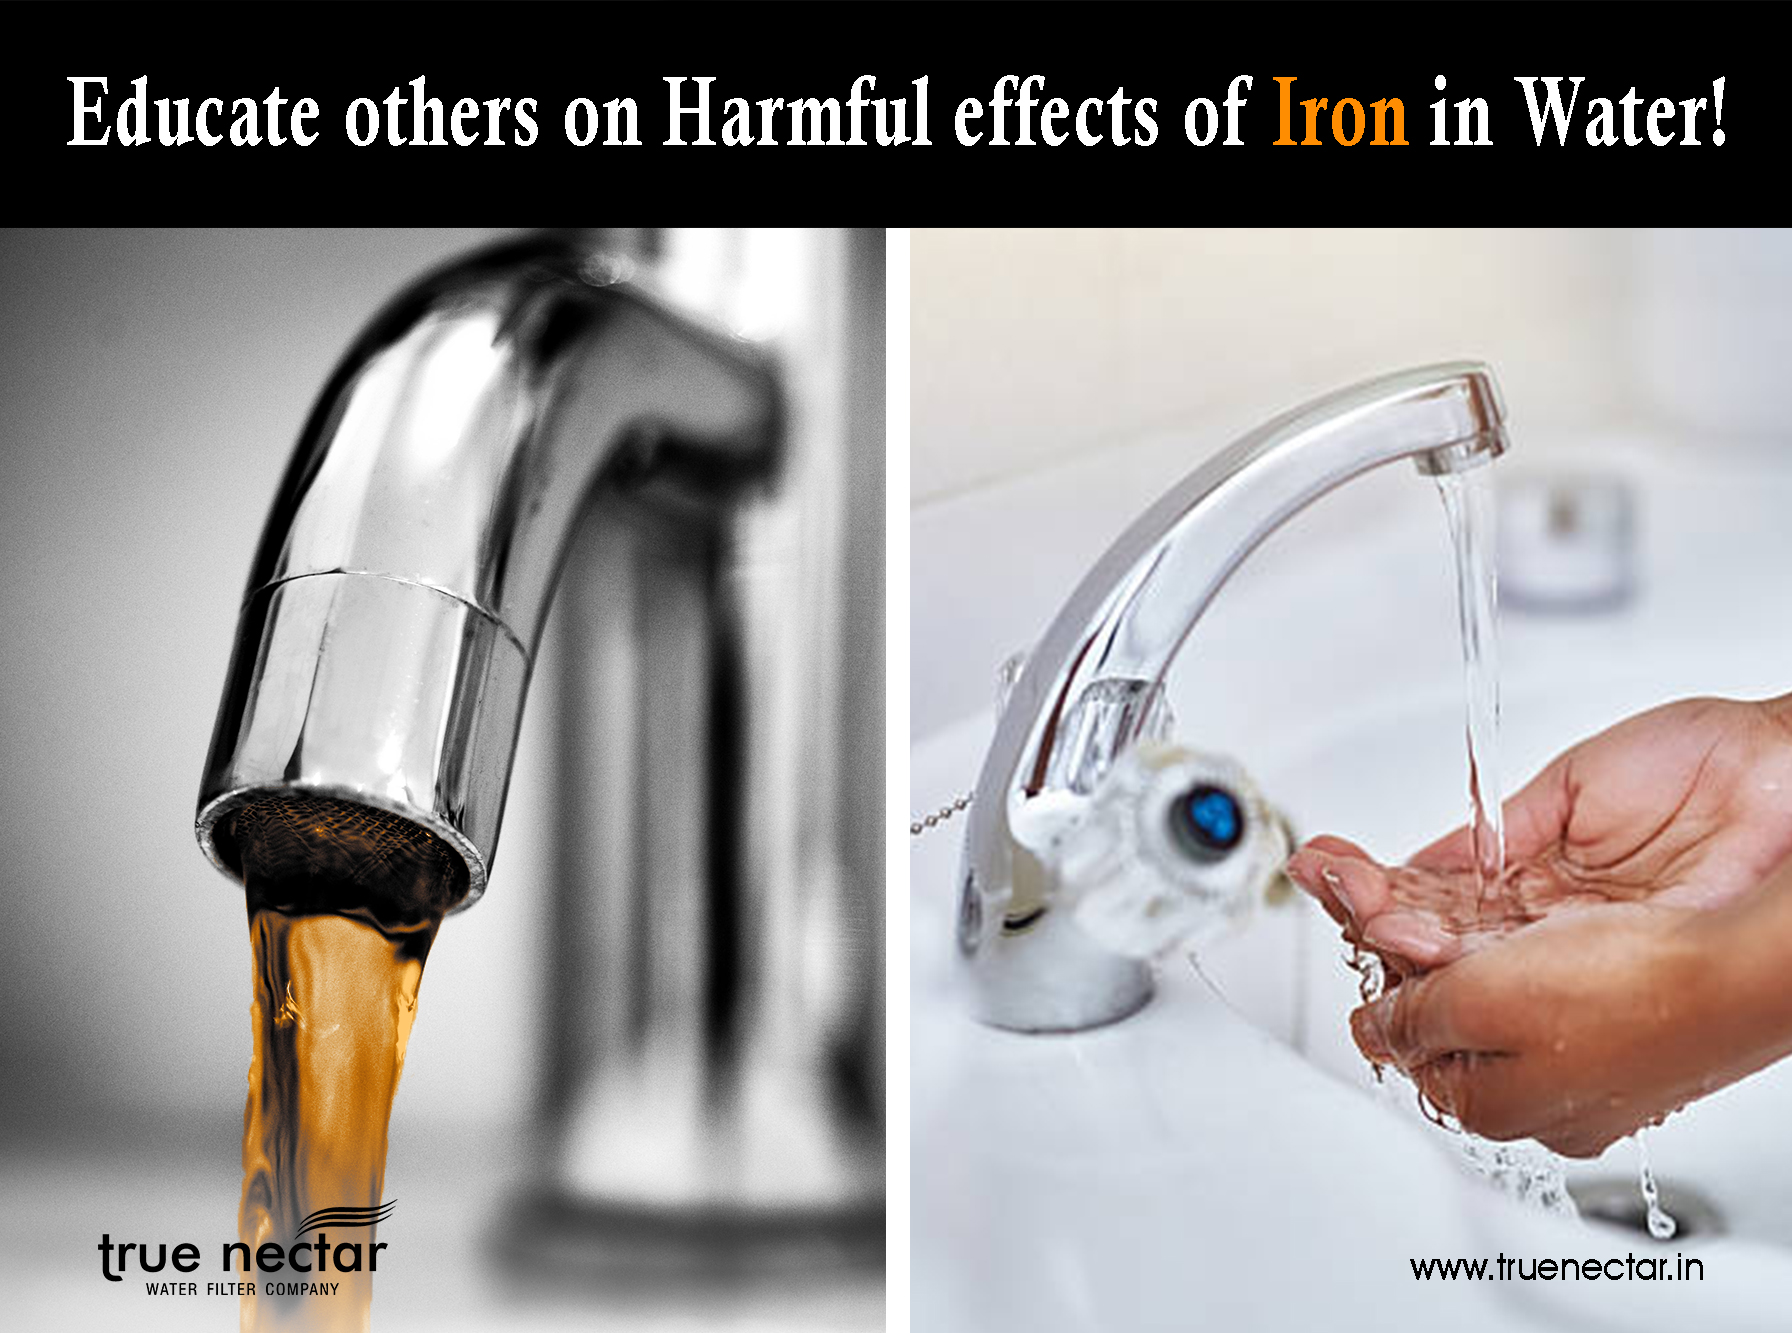 Educate others on Harmful effects of Iron in Water!